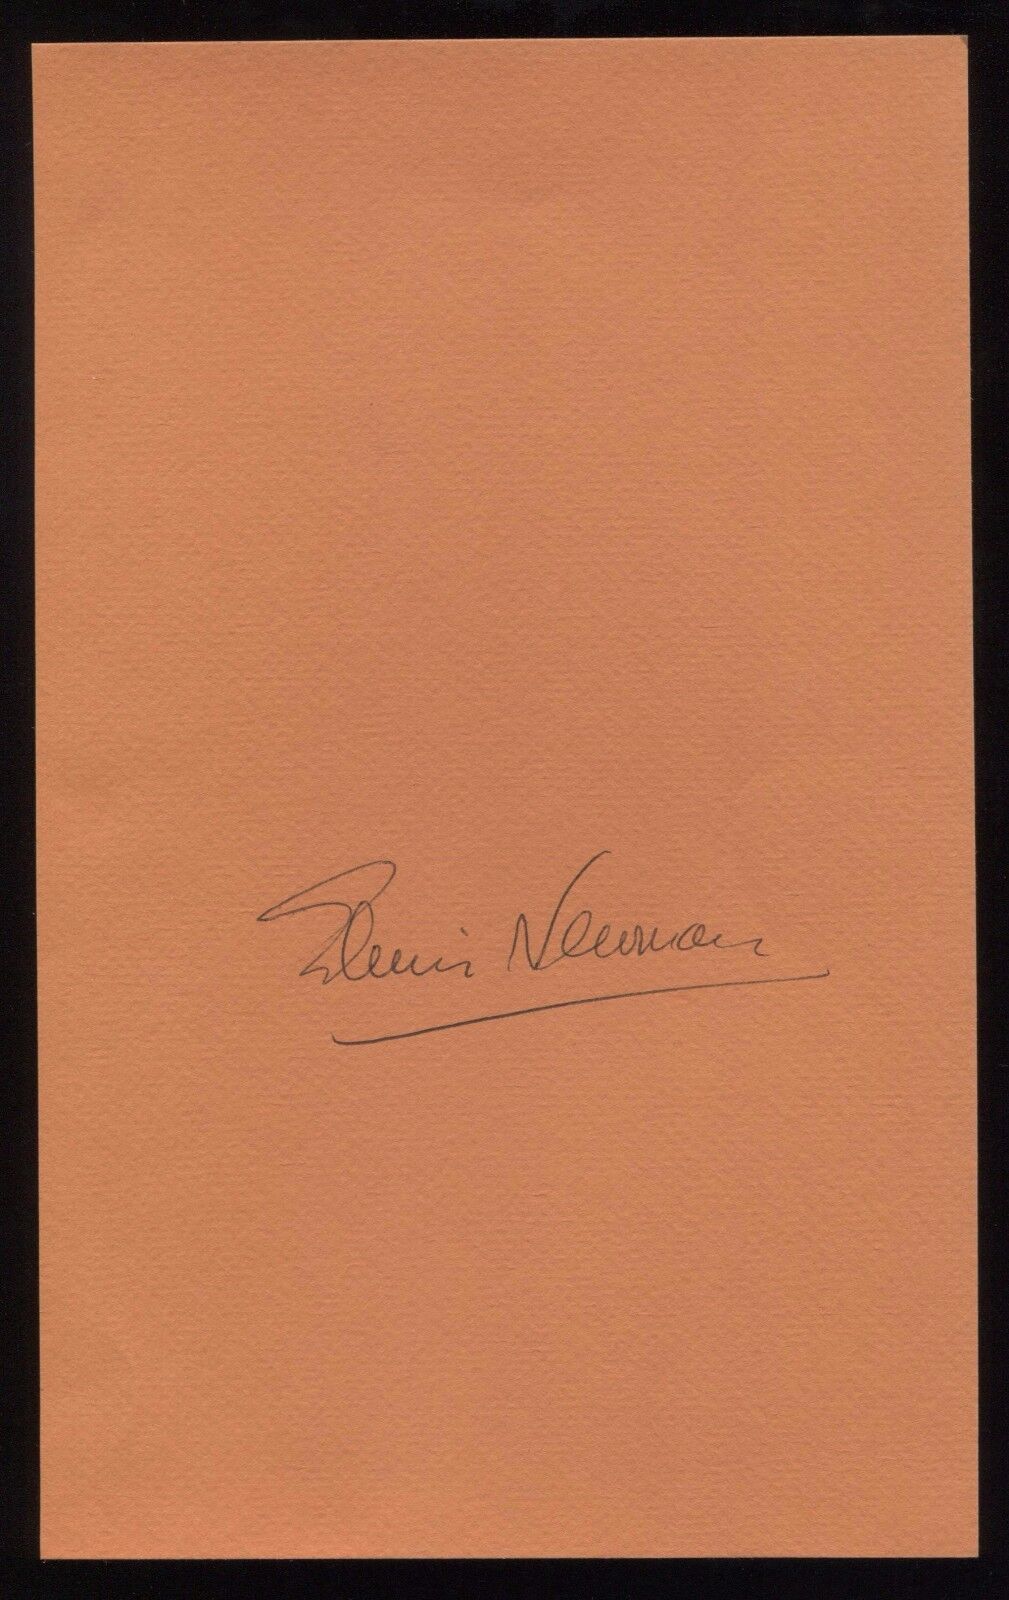 Edwin Newman Signed Book Page Cut Autographed Cut Signature 